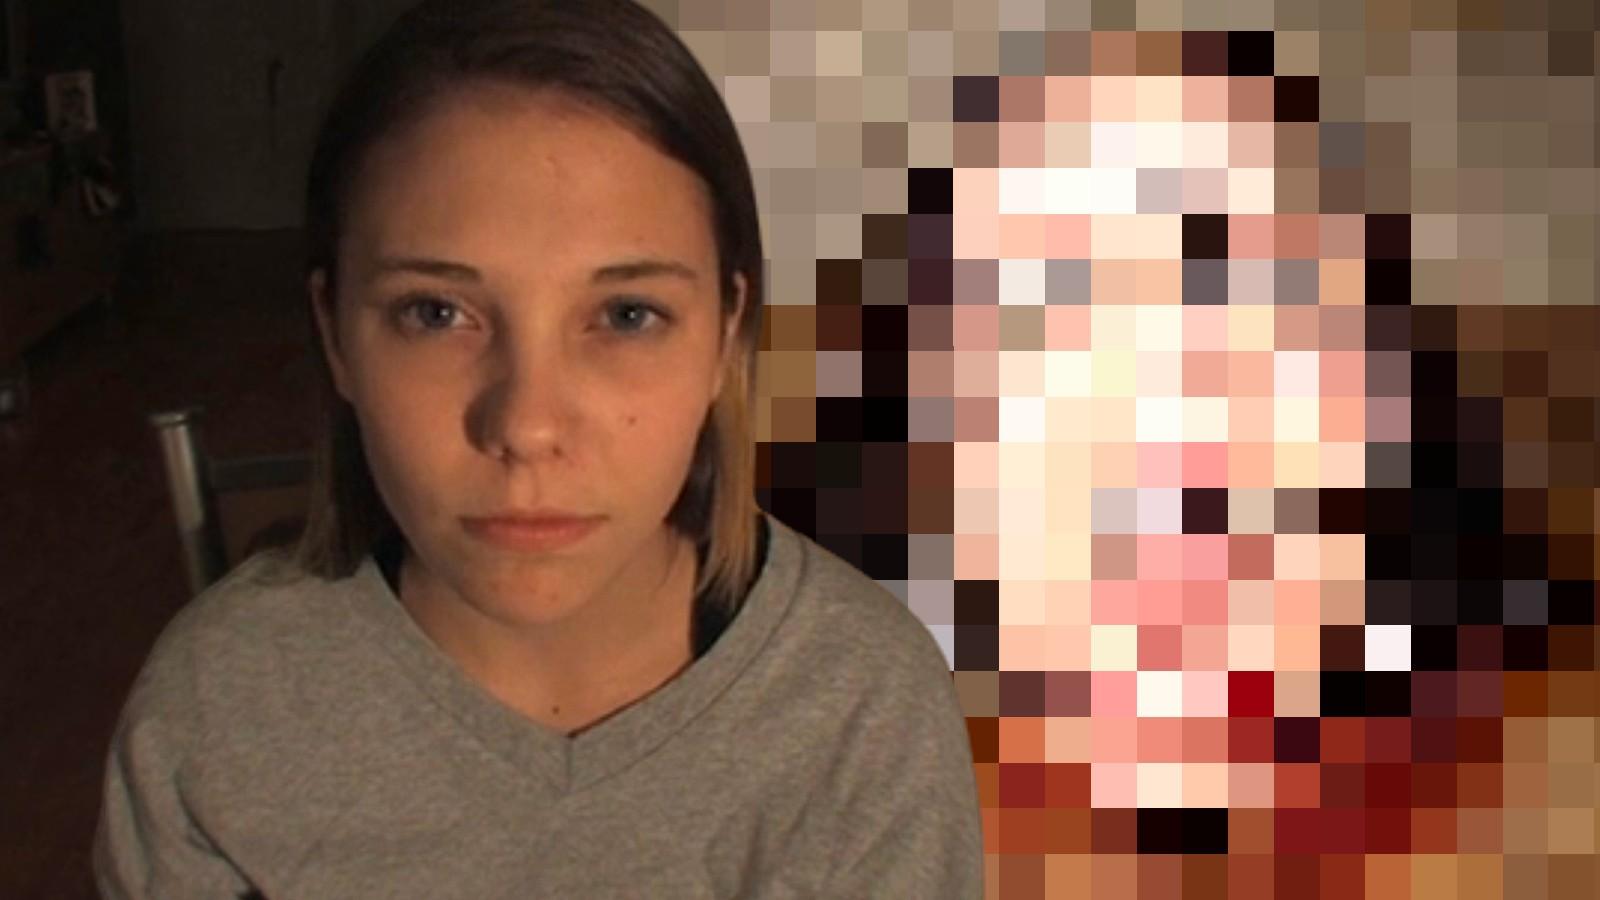 Stills from Megan is Missing, including a pixelated version of Photo #1